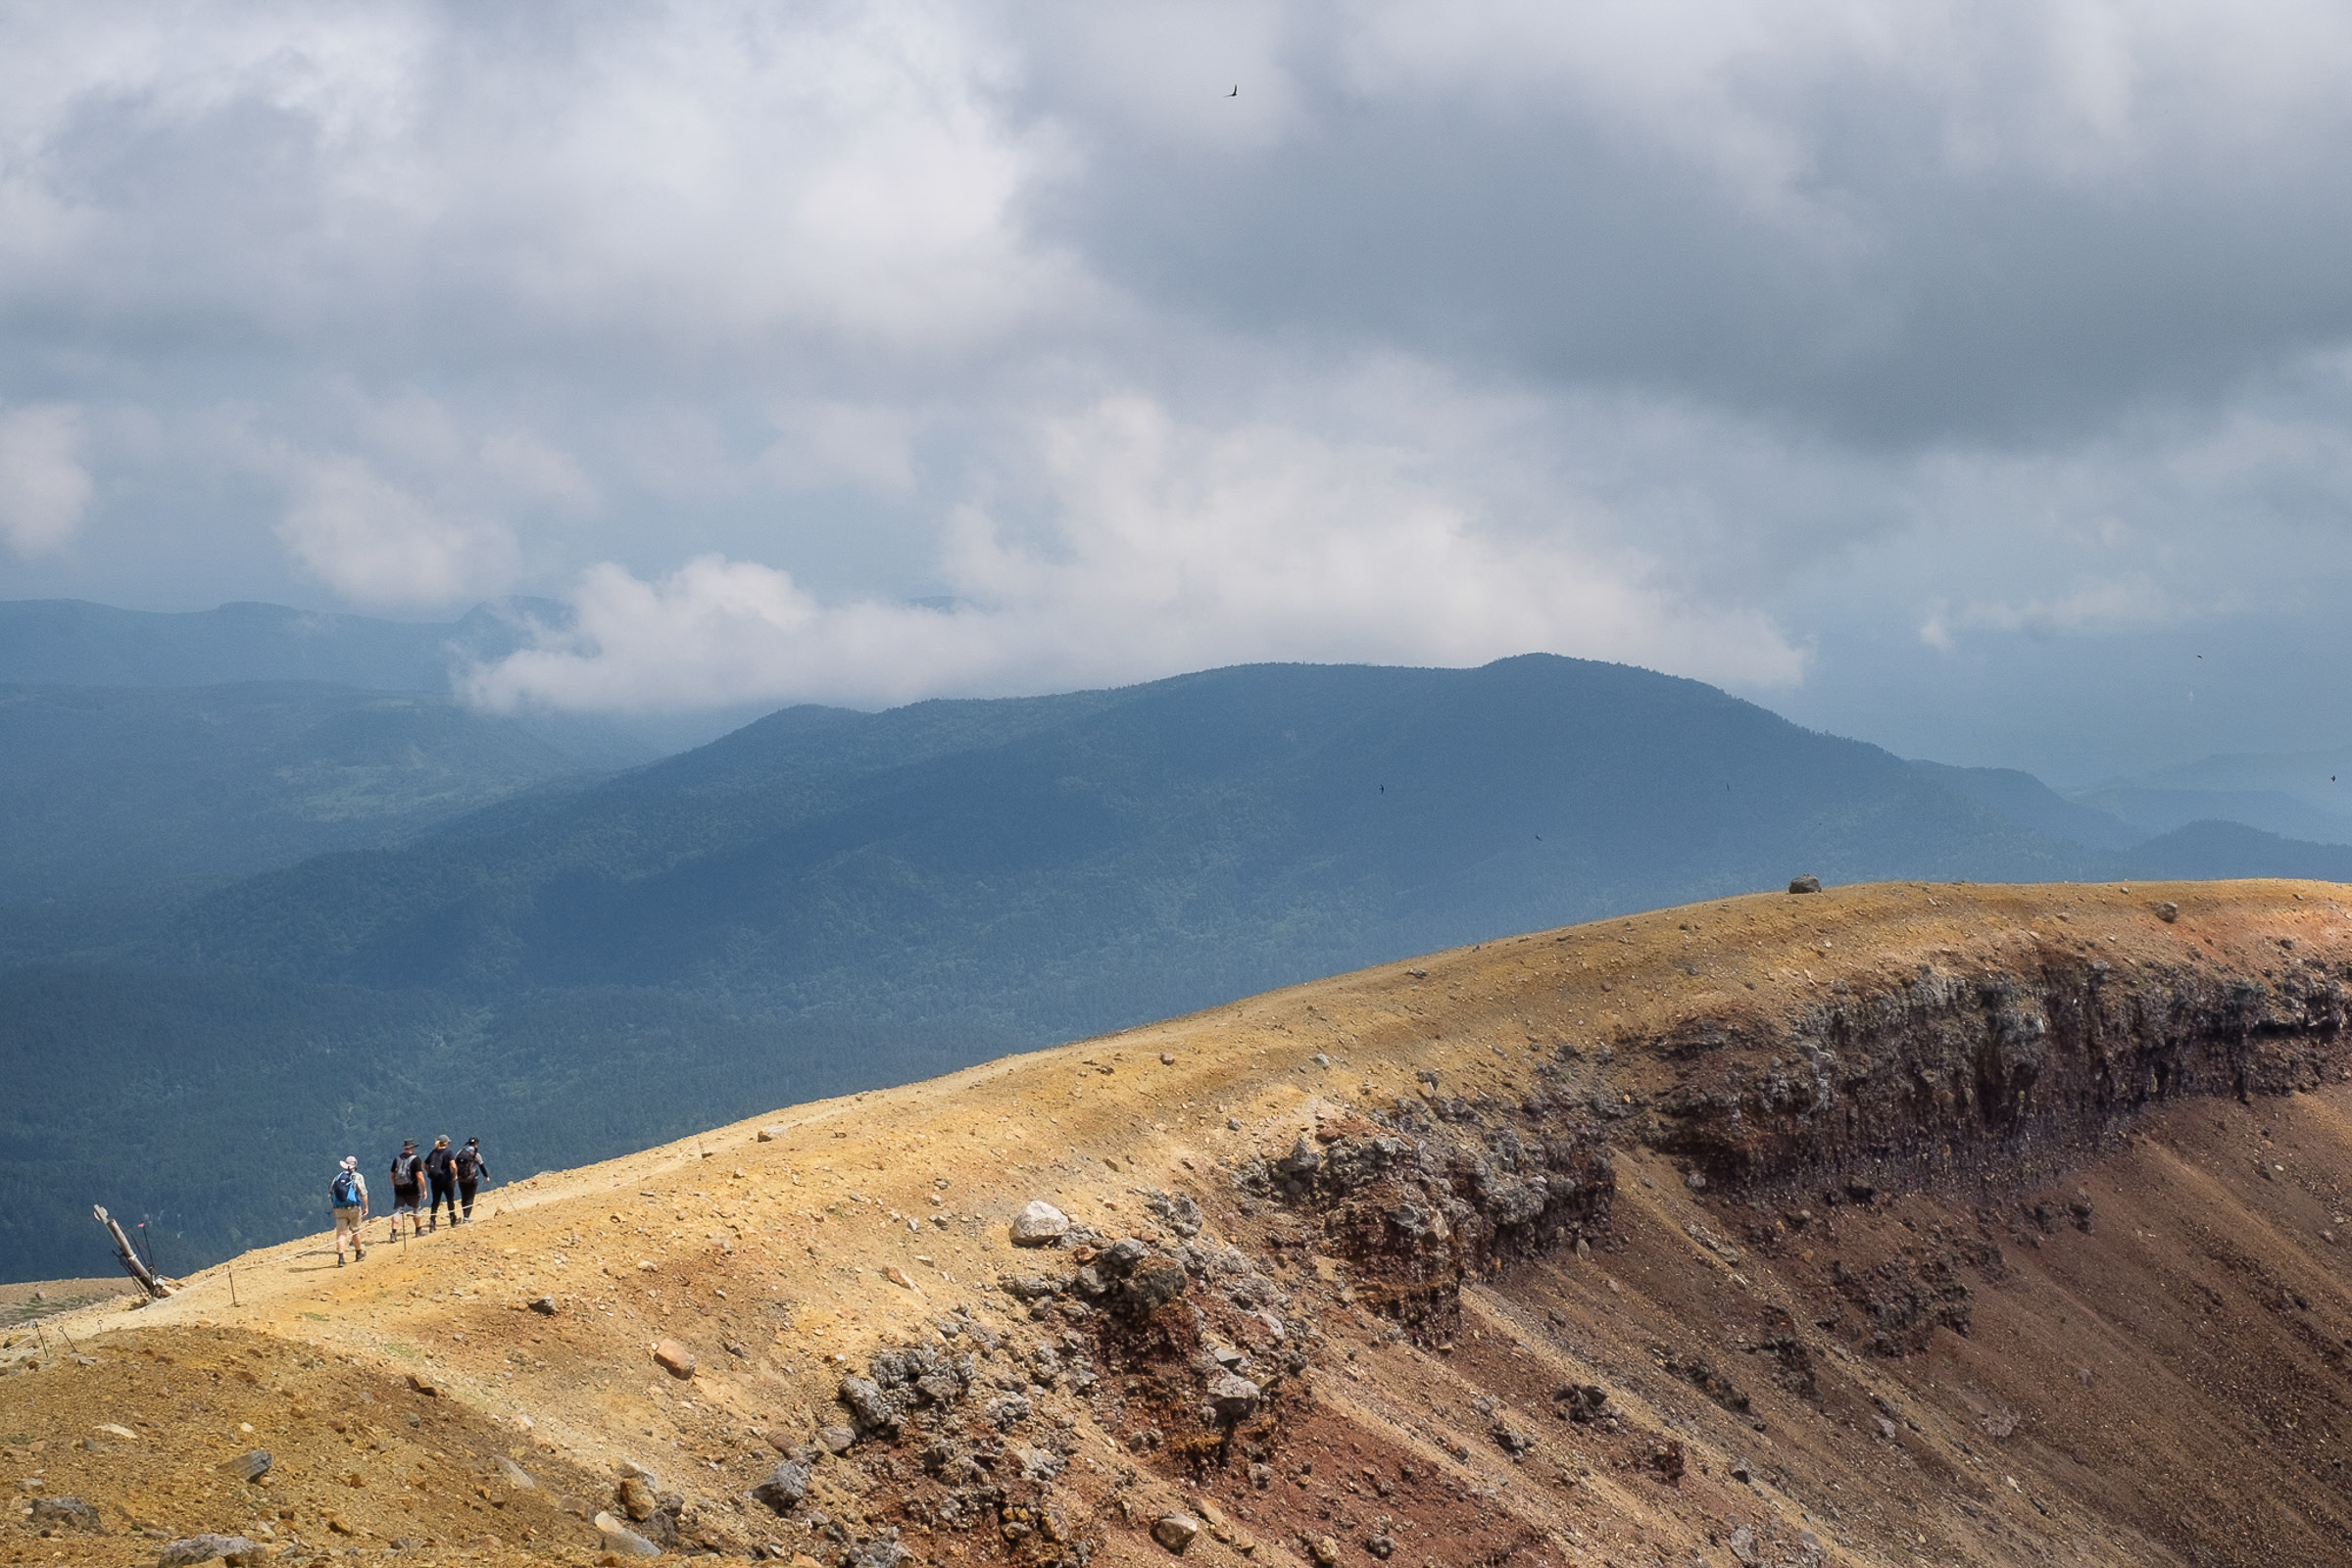 A group of hikers walk along the ridge of Mt. Meakan on a cloudy day.